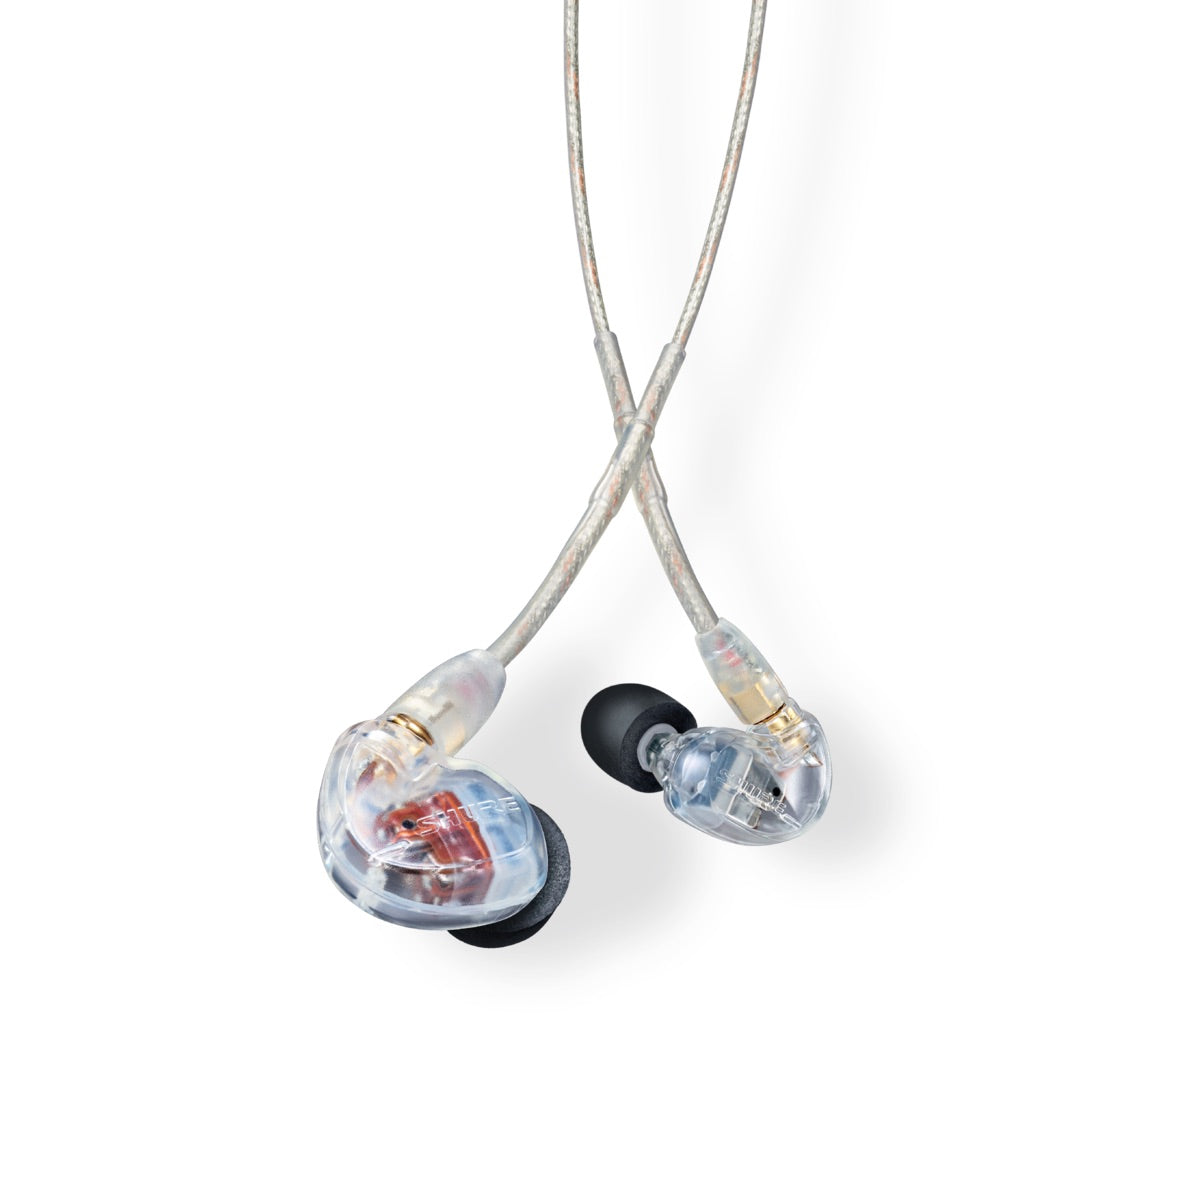 Shure SE535-CL - Sound Isolating Triple Driver Earphone, Clear